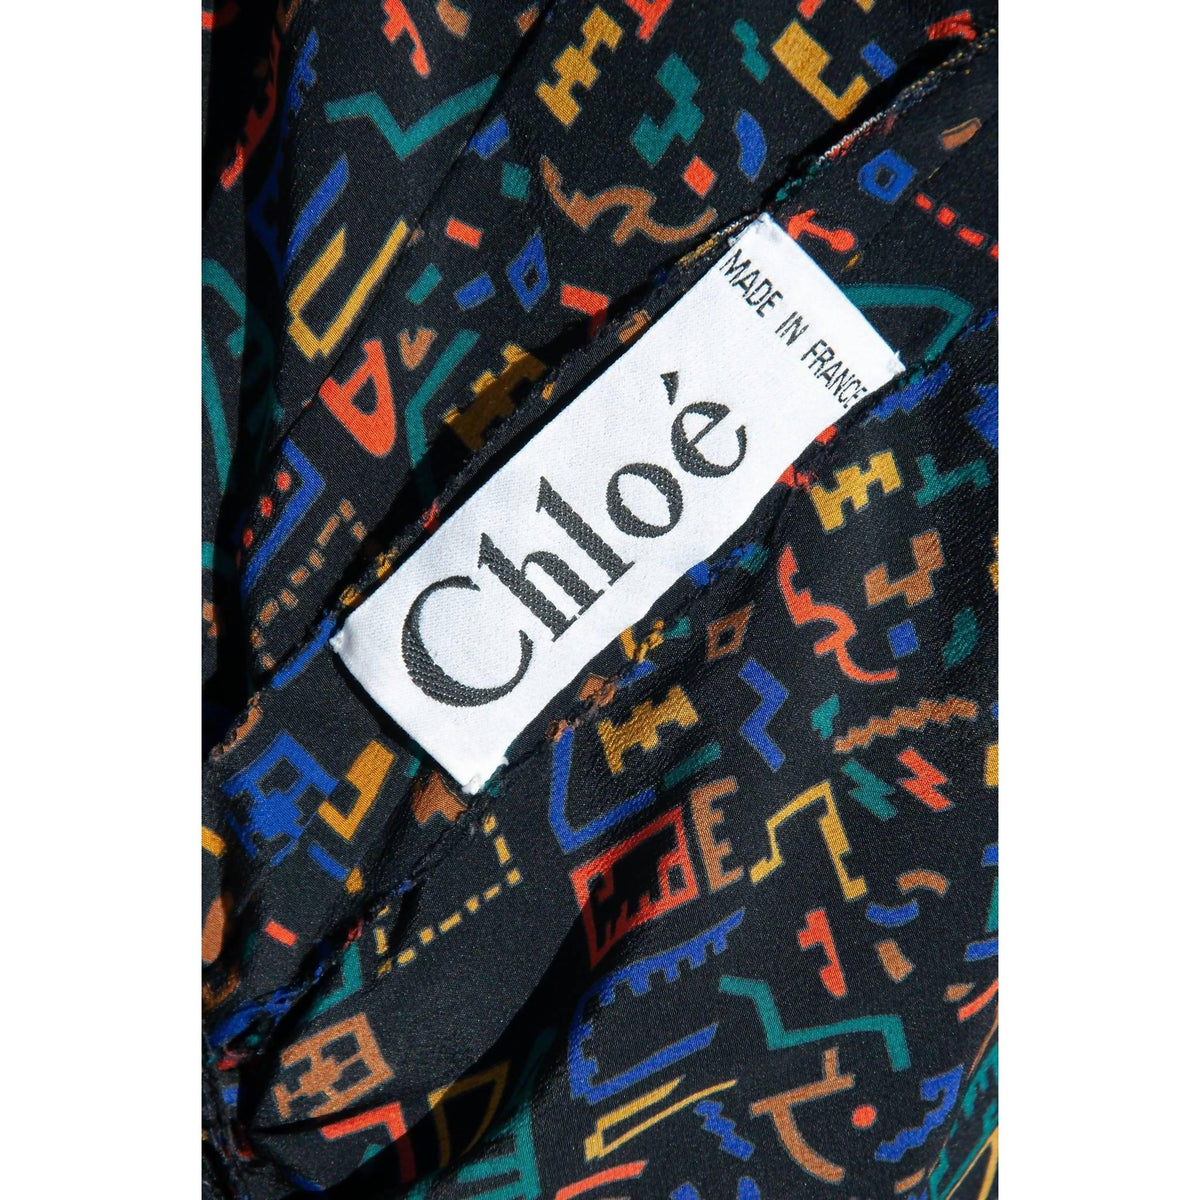 Pre-loved CHLOÉ Vintage Multicolored Patterned Dress | Size M - theREMODA